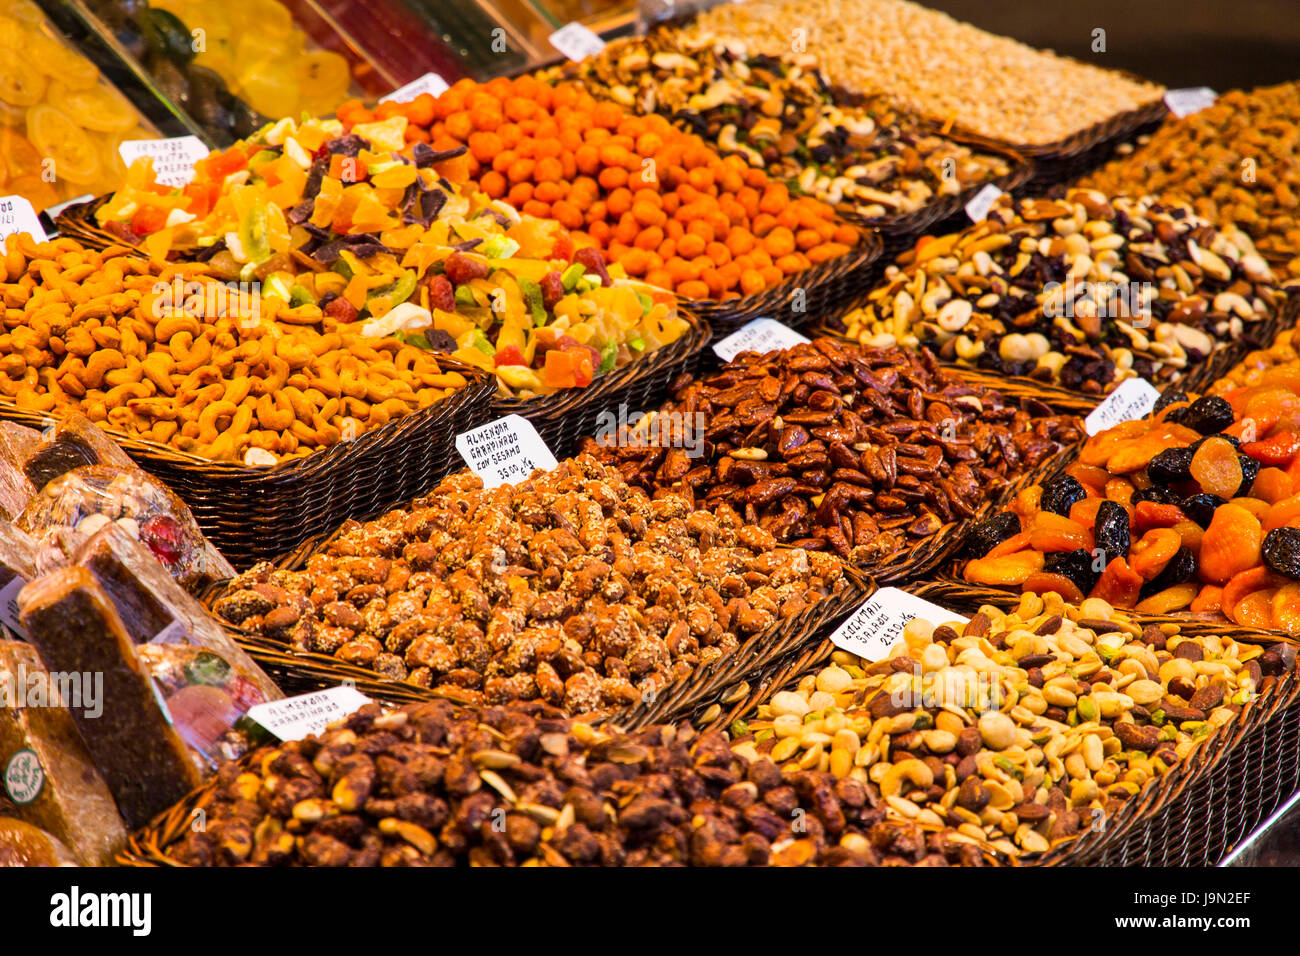 Appetizing displays of fruit, vegetables, nuts, sweets, meat, fish and cheese greet visitors to the sprawling La Boqueria market in Barcelona, Spain. Stock Photo